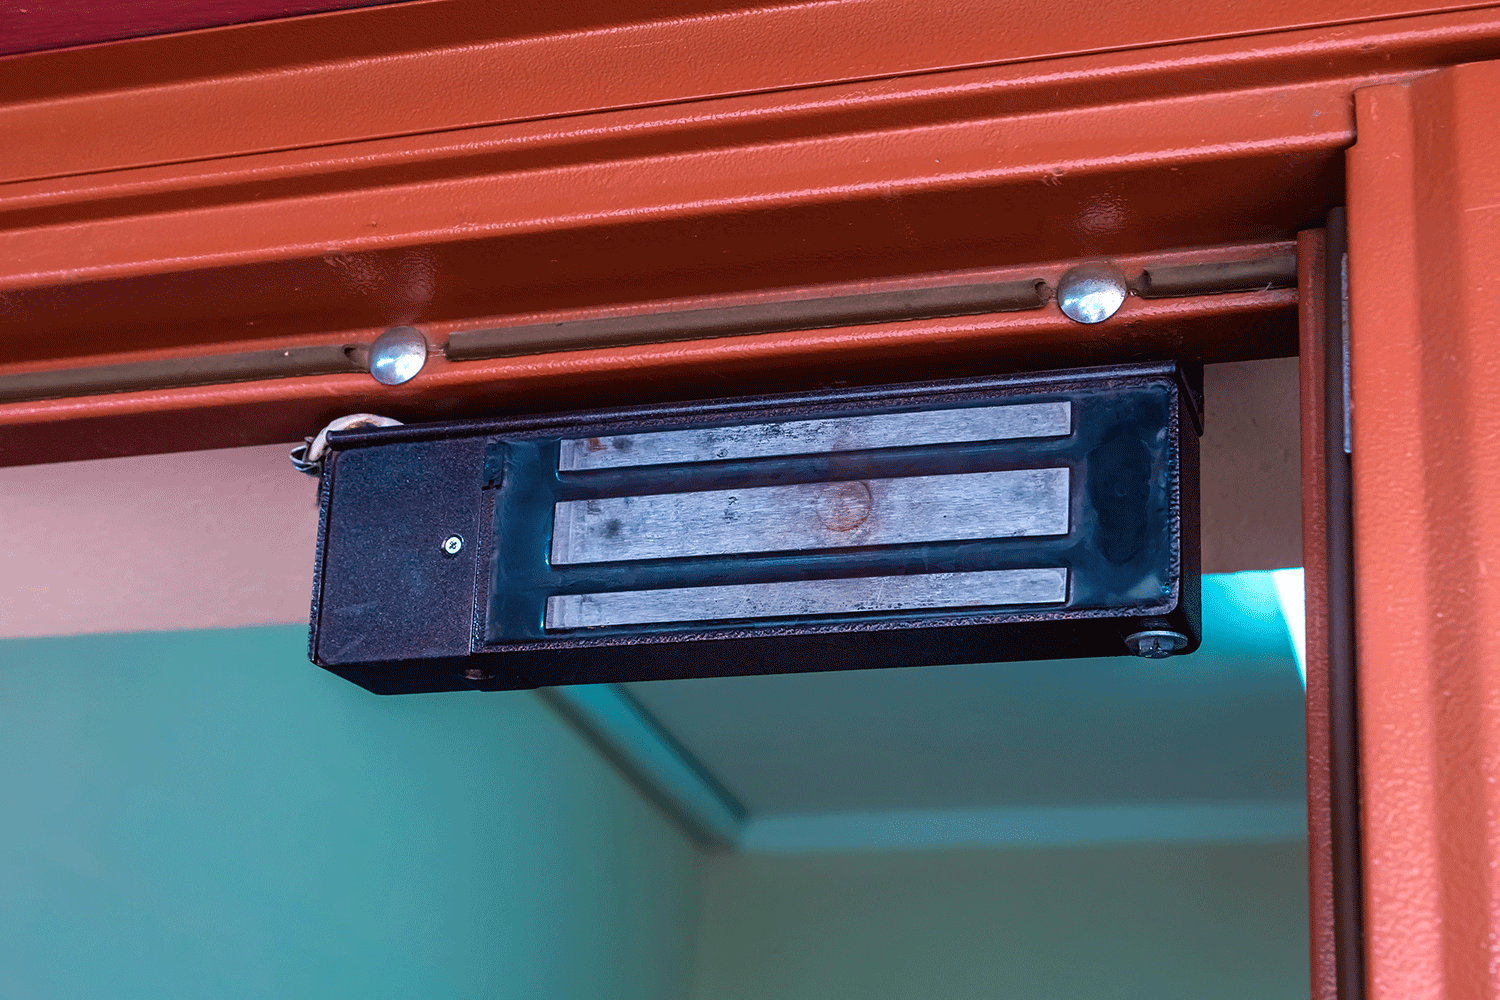 An electric magnet on the front door from above